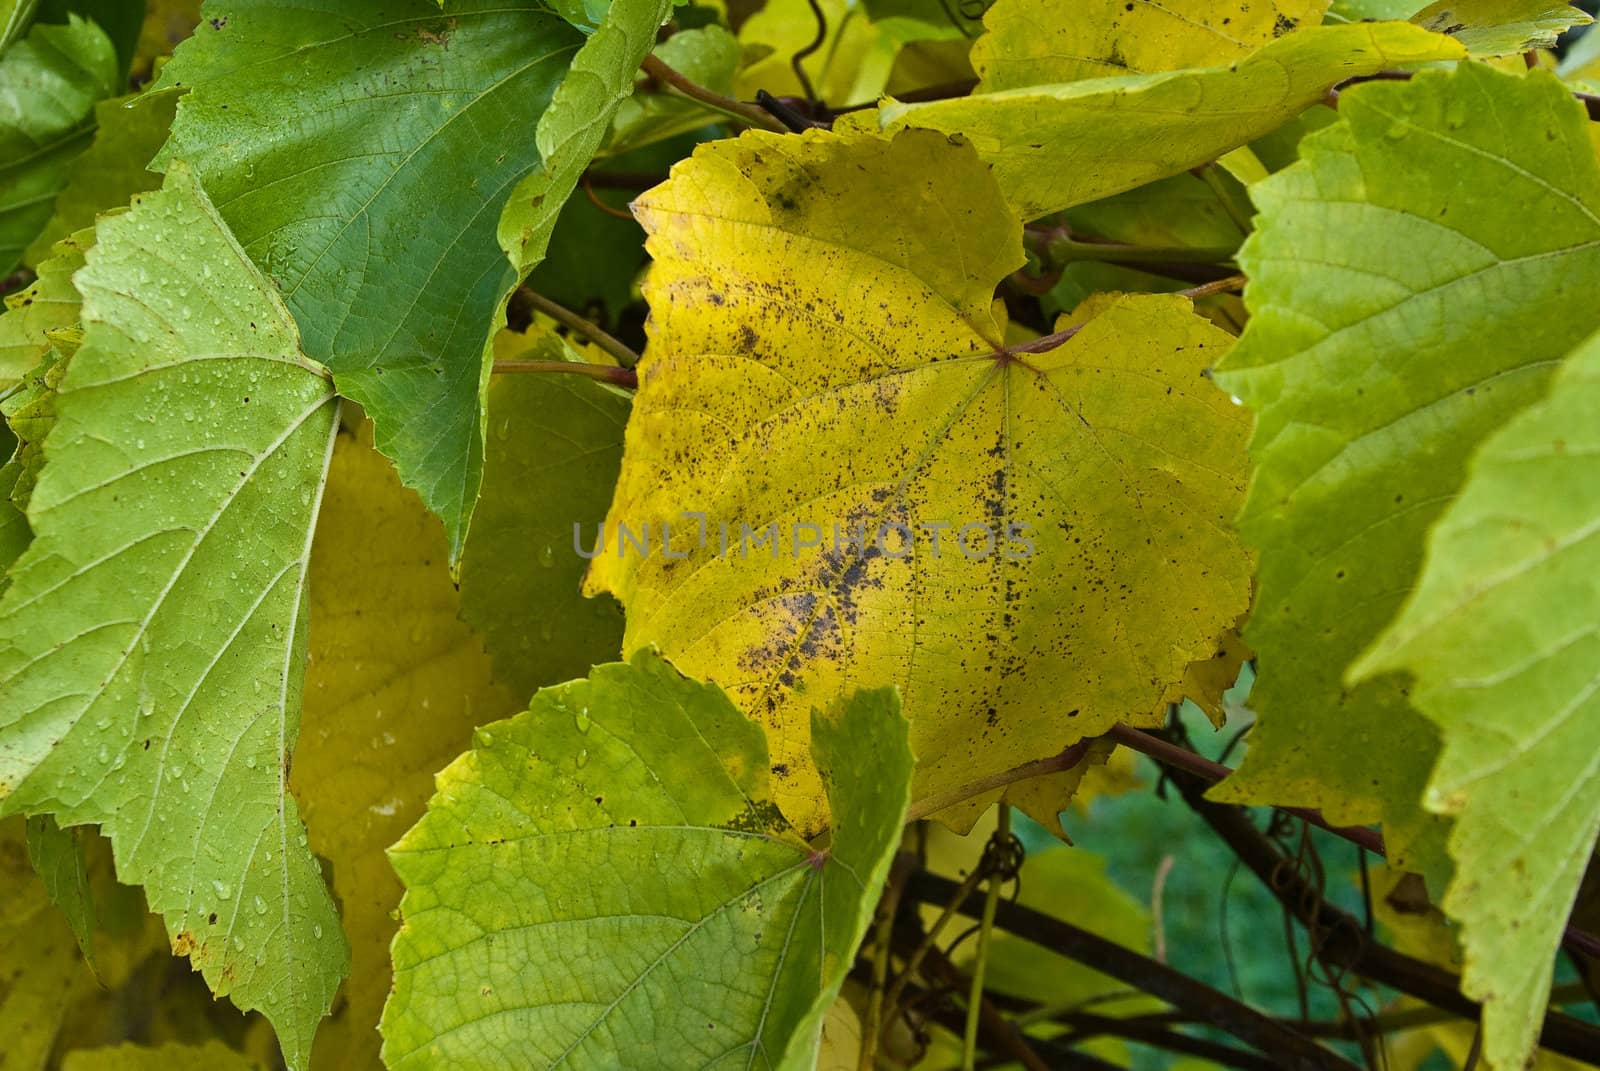 some colorful wine leaves in green and yellos